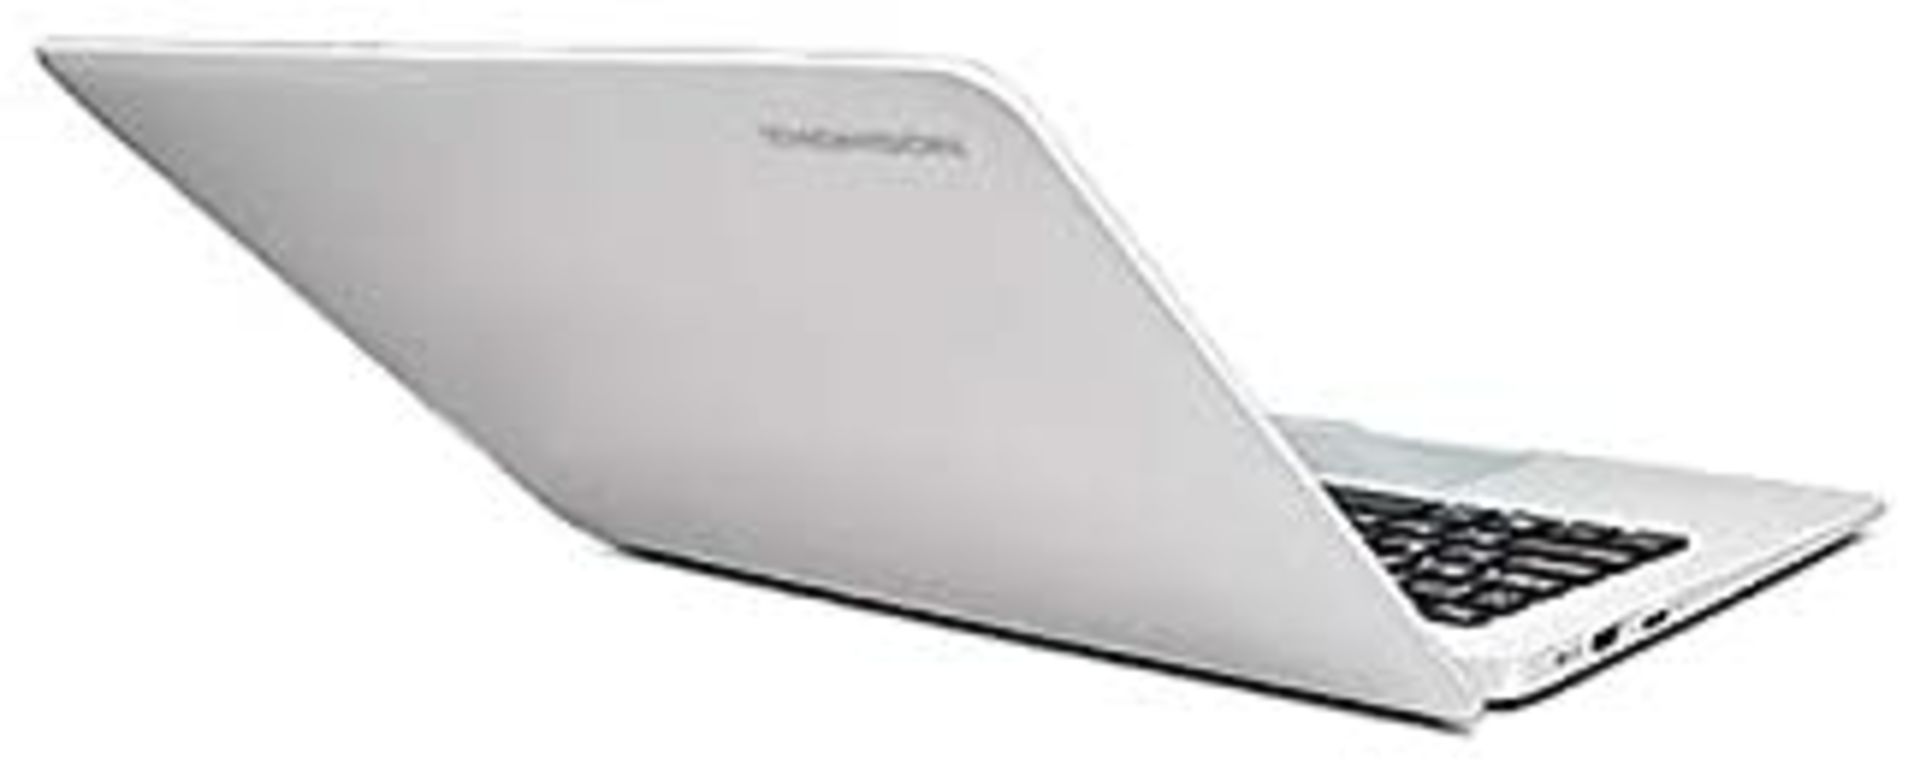 (T13) 1 x GRADE B - THOMSON UK-NEO10A-2WH32 10.1 Inch Laptop with Intel Atom 1.44GHz, 2GB RAM, ... - Image 3 of 3